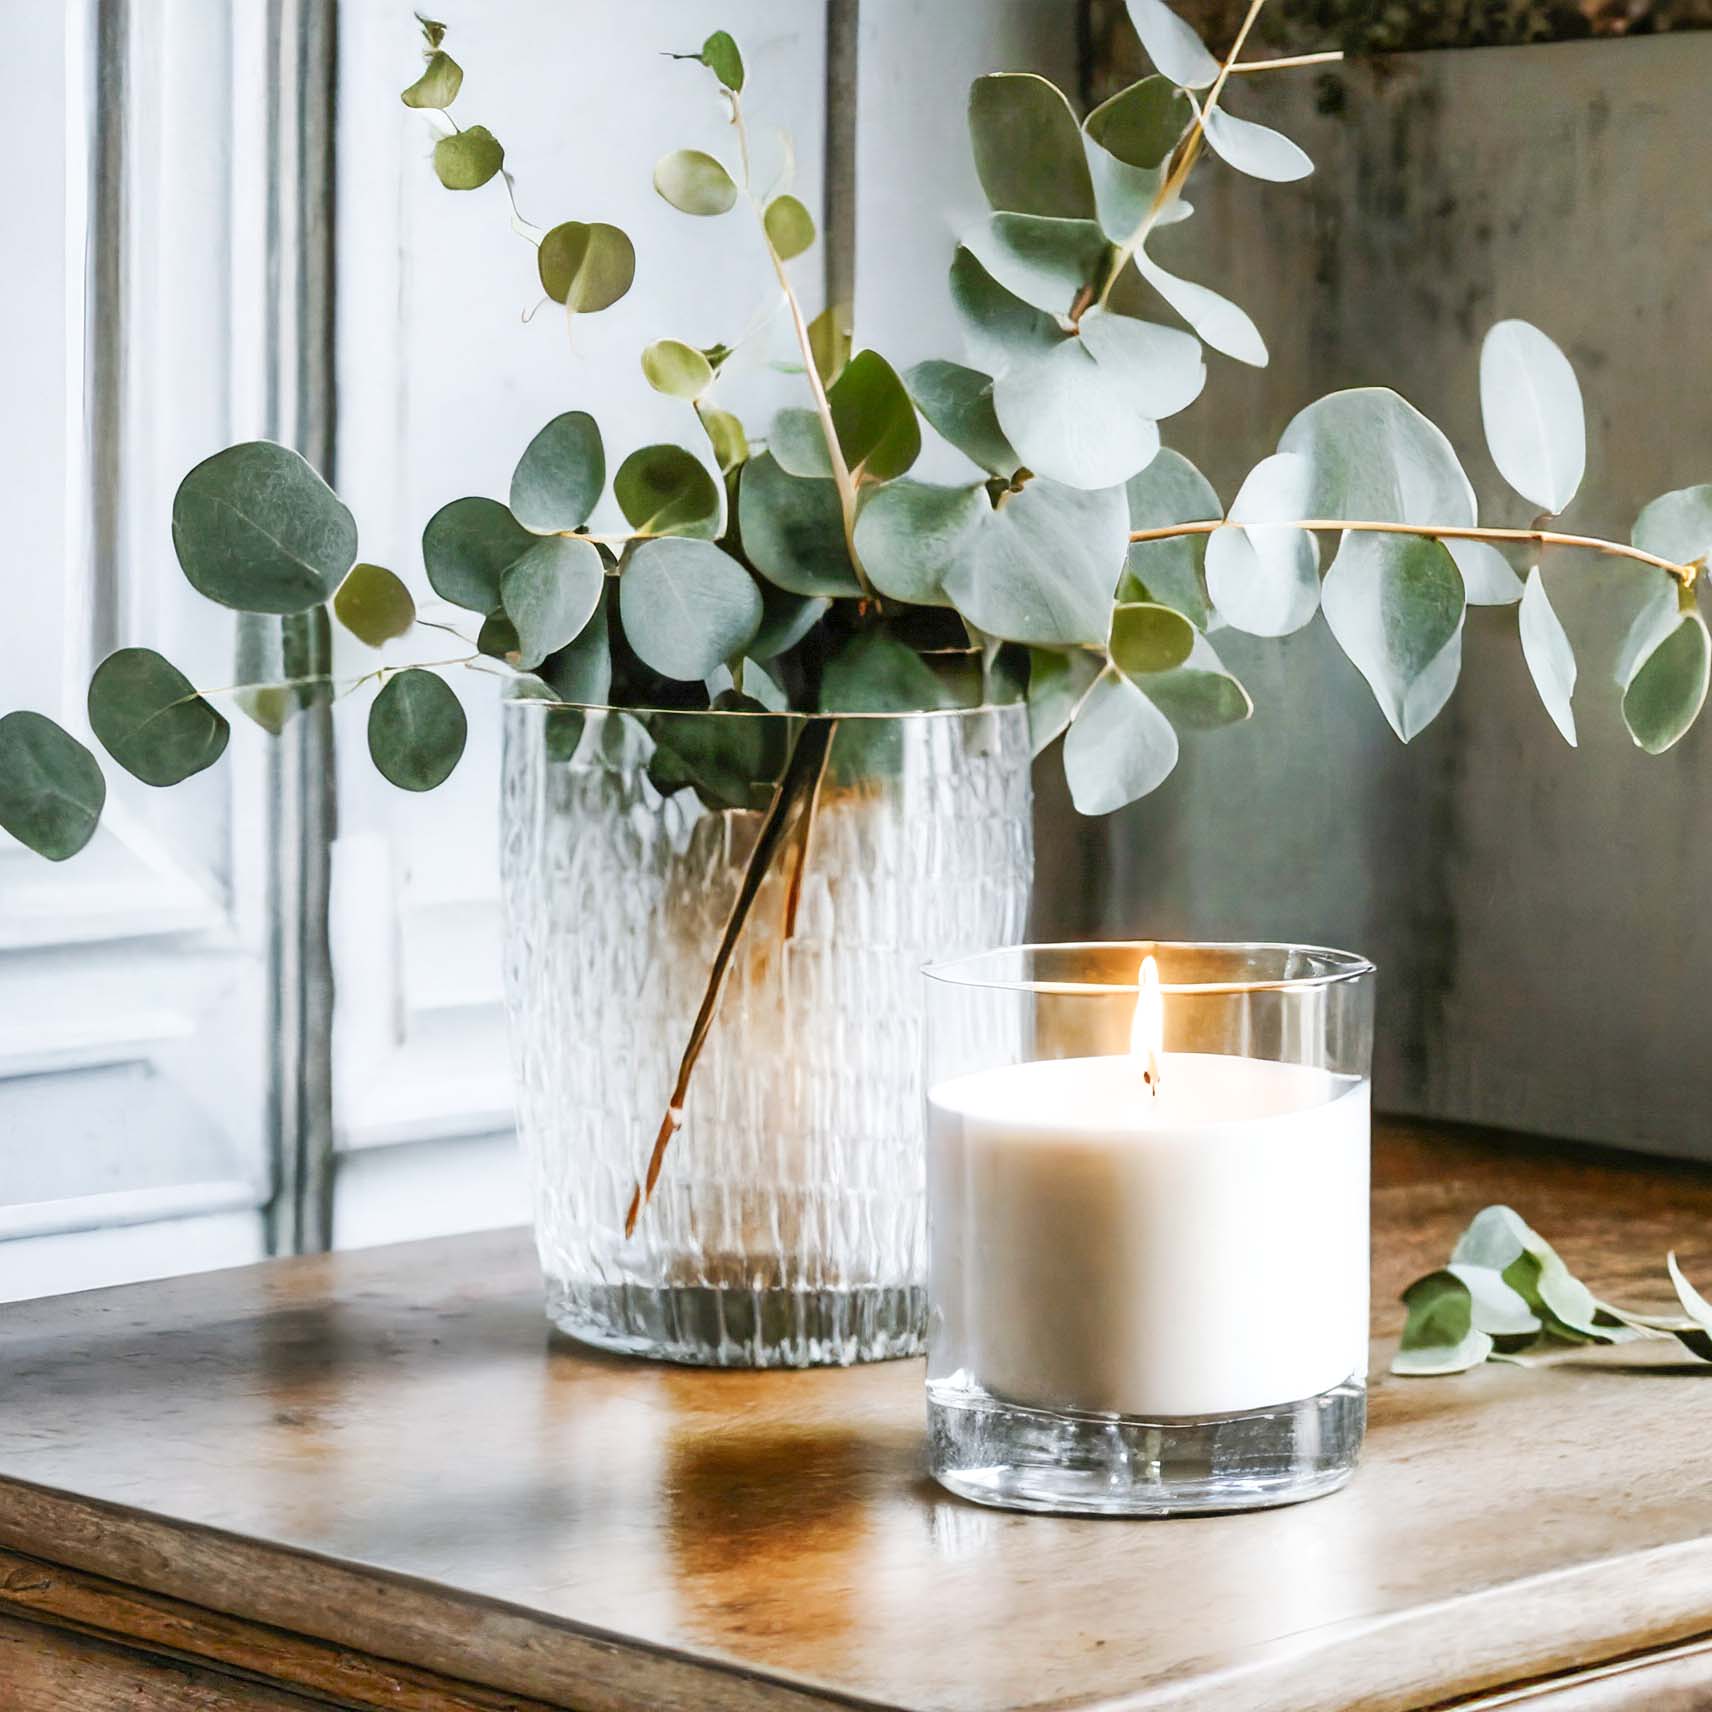 Scented soy wax blend candle on wood table with glass vase filled with eucalyptus stems.